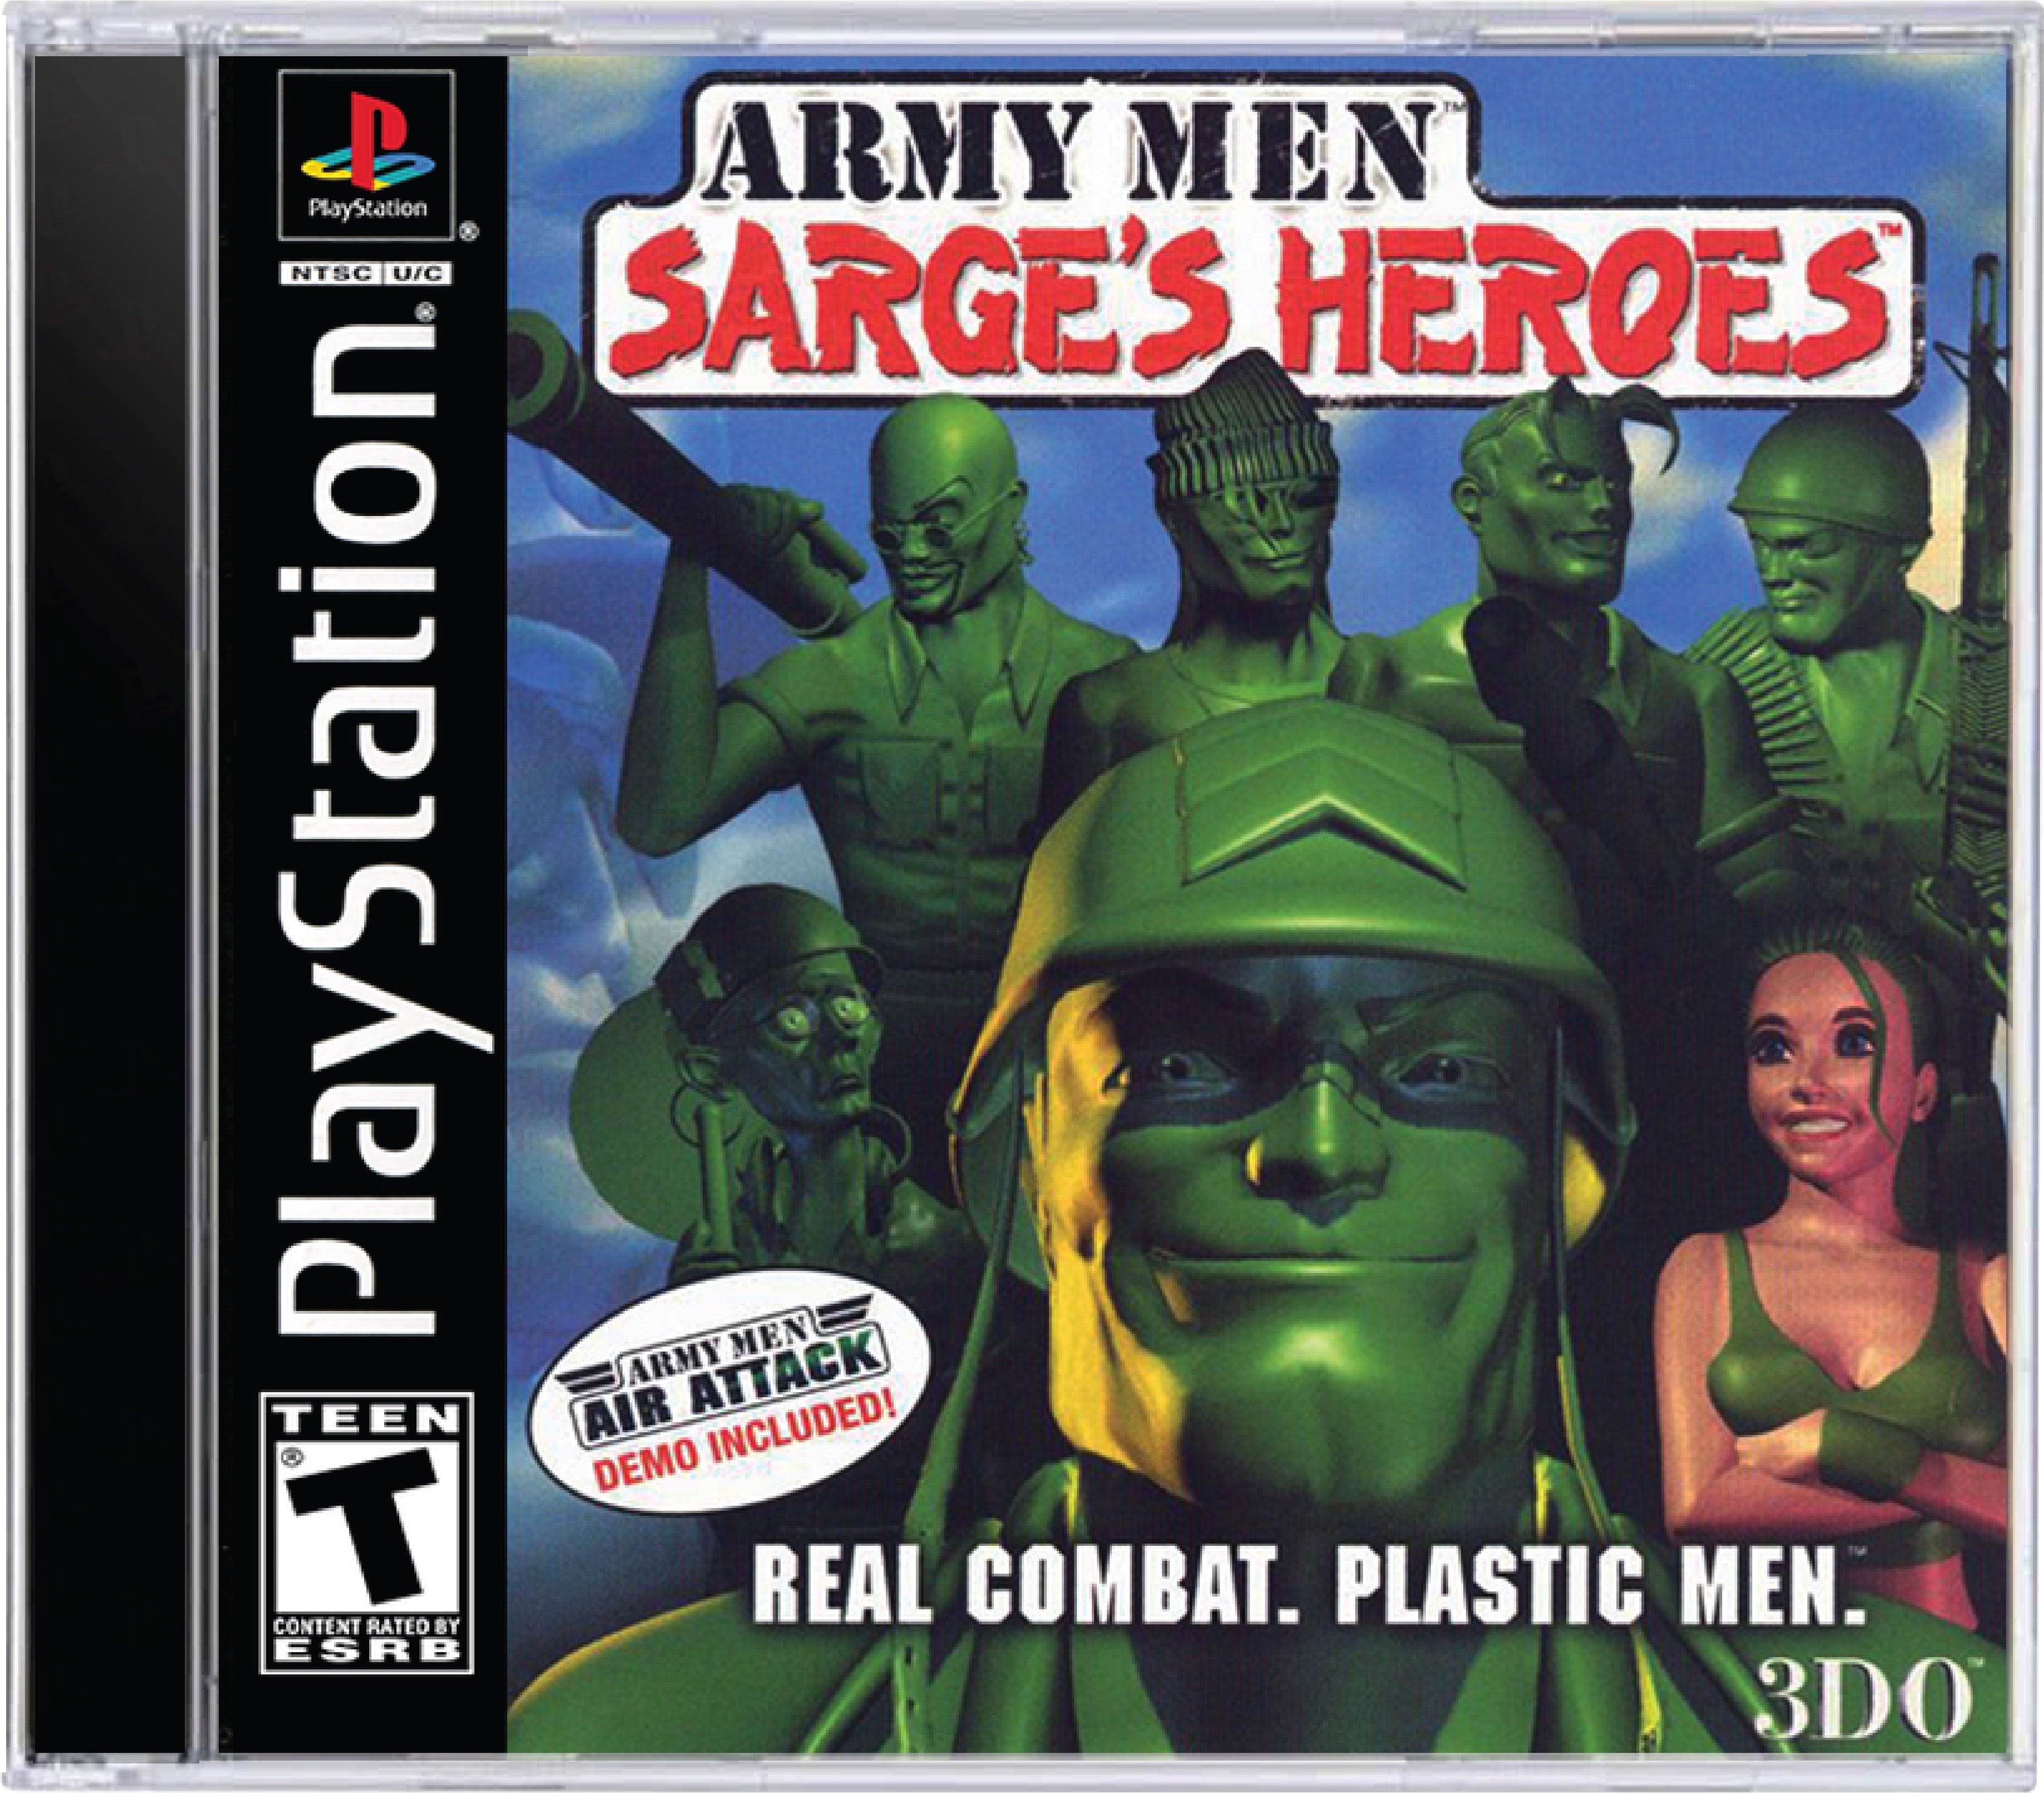 Army Men Sarge's Heroes Cover Art and Product Photo